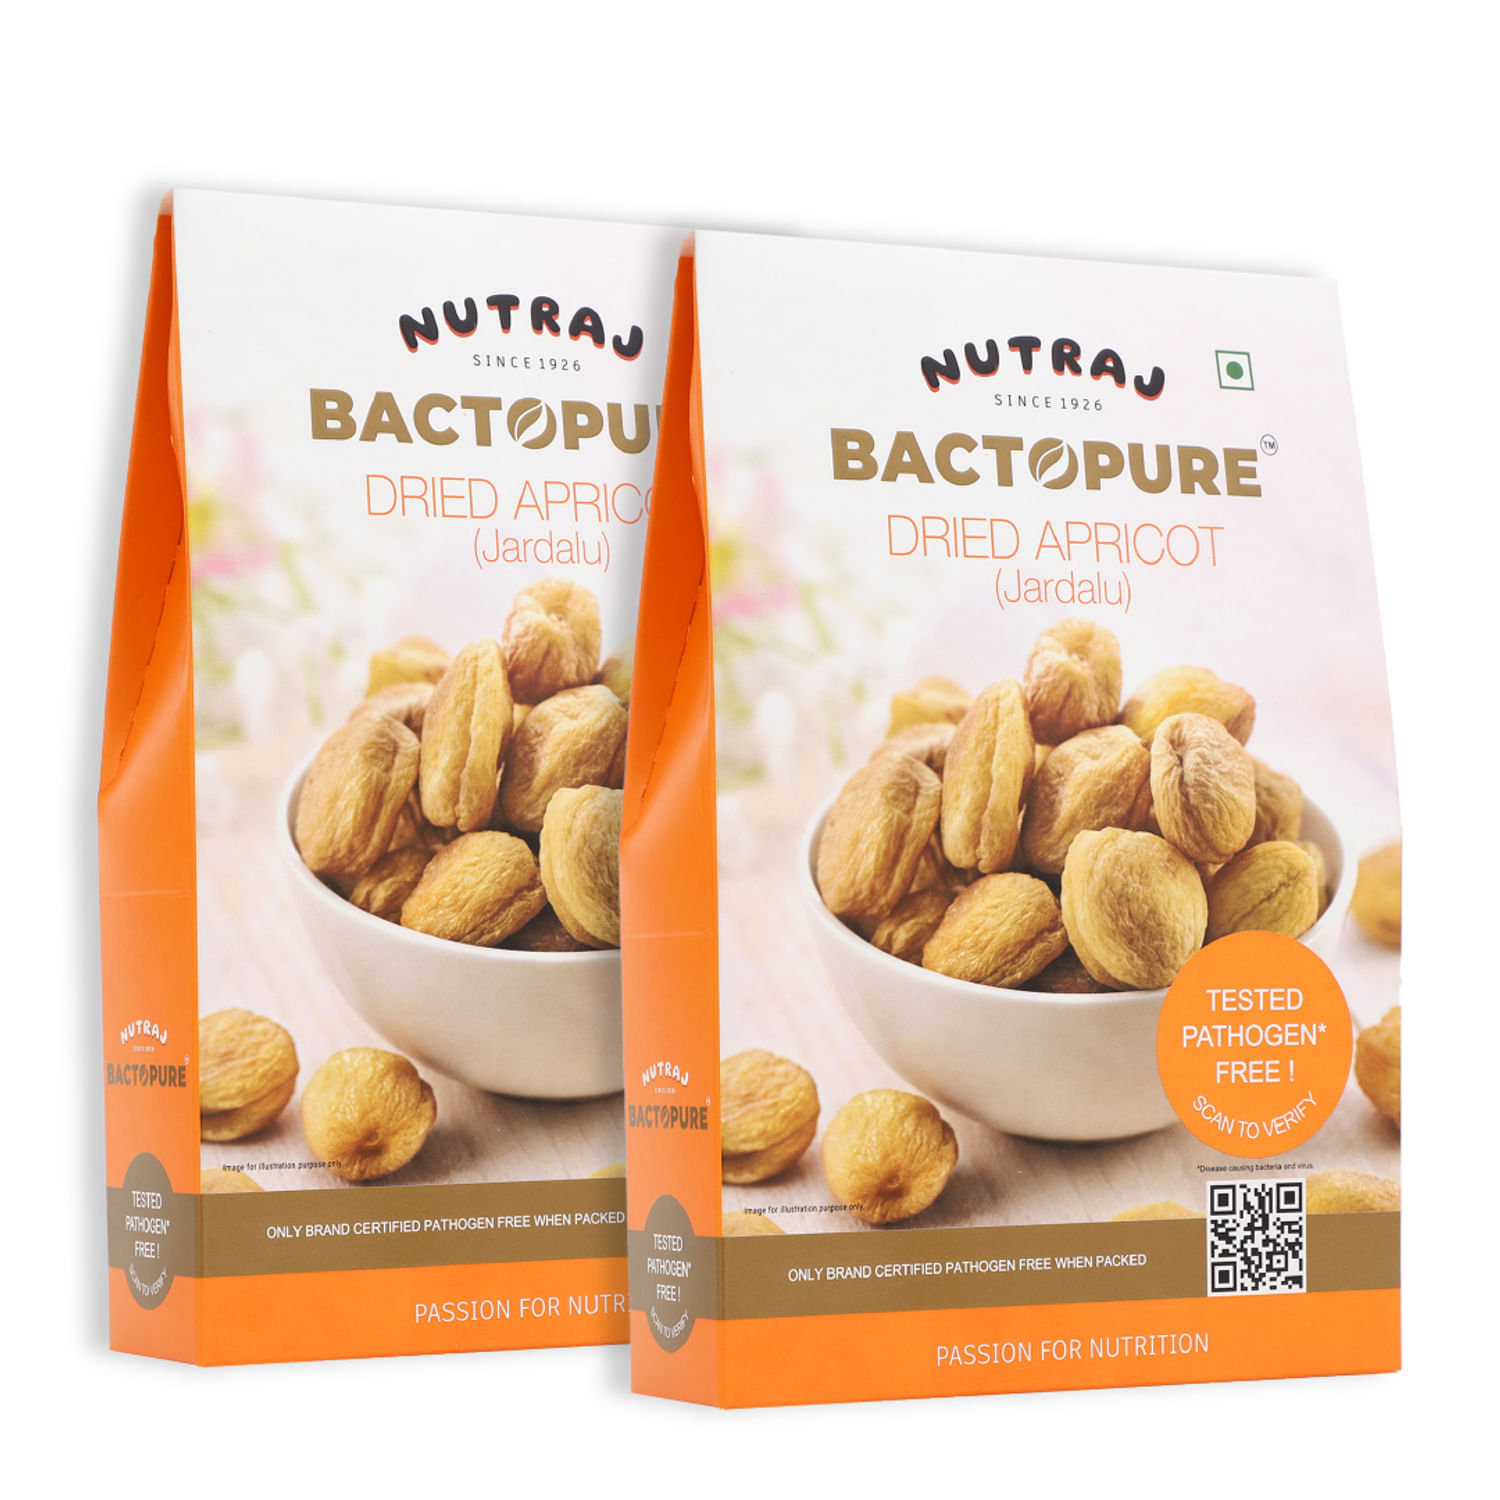 Bactopure Apricot (Jardalu) 250 gm - Pack of 2